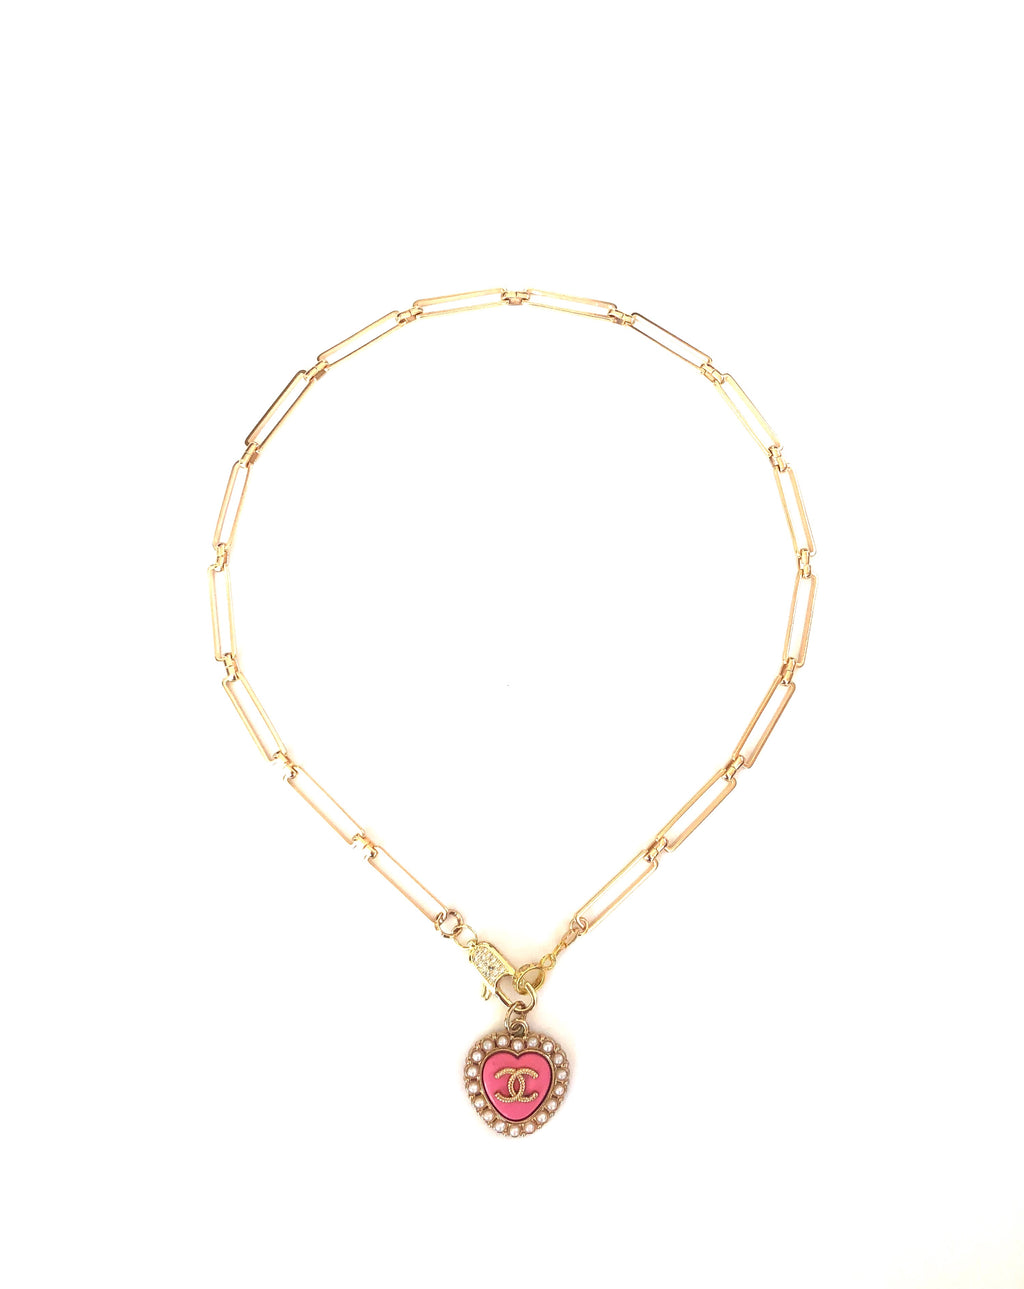 Vintage Pink Heart Charm and Gold Filled Link Chain Necklace